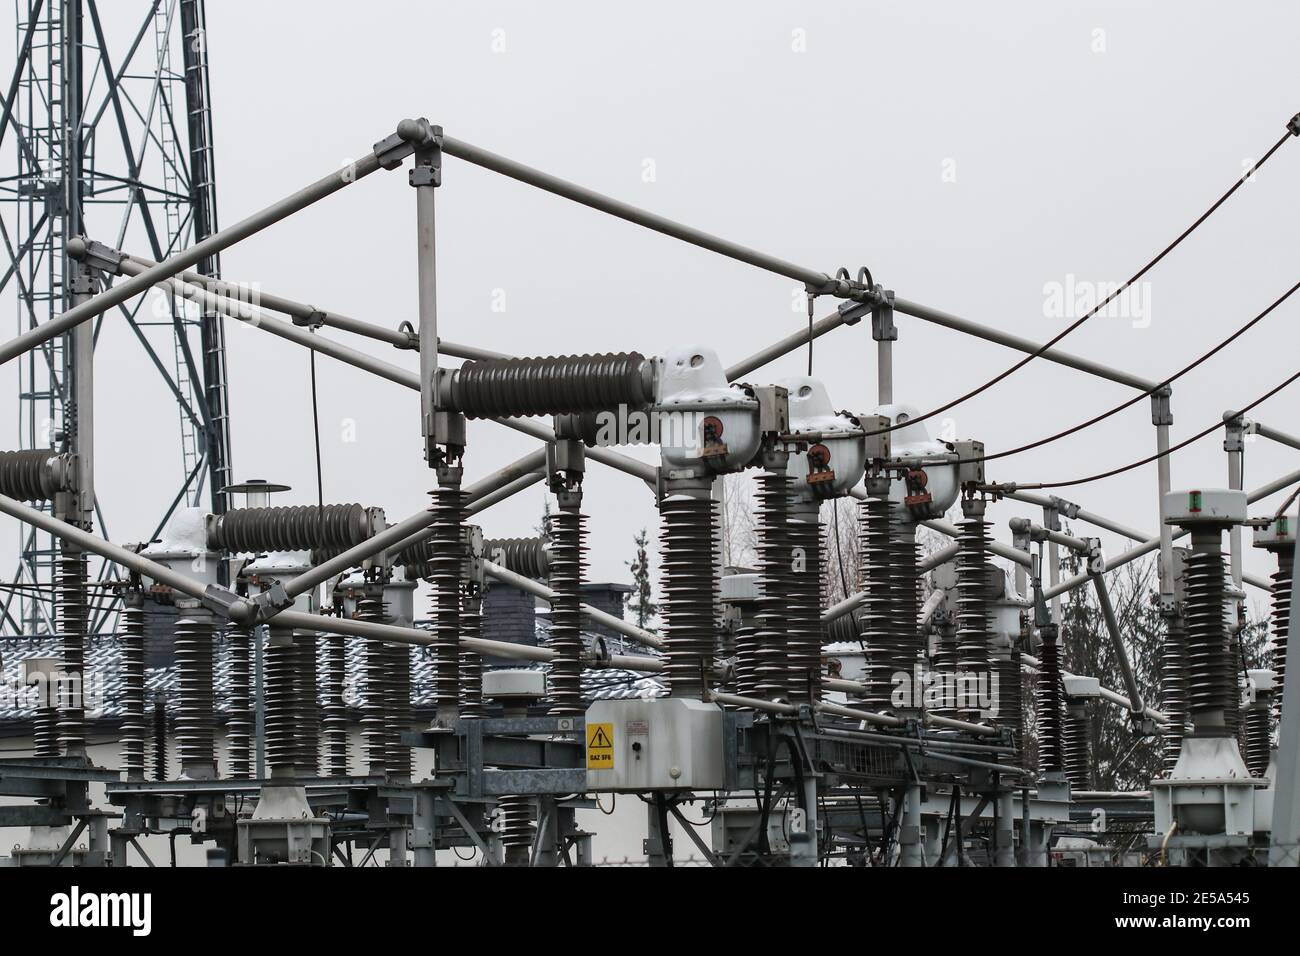 Details of 100 kV transformer power substation located in Poland Stock Photo